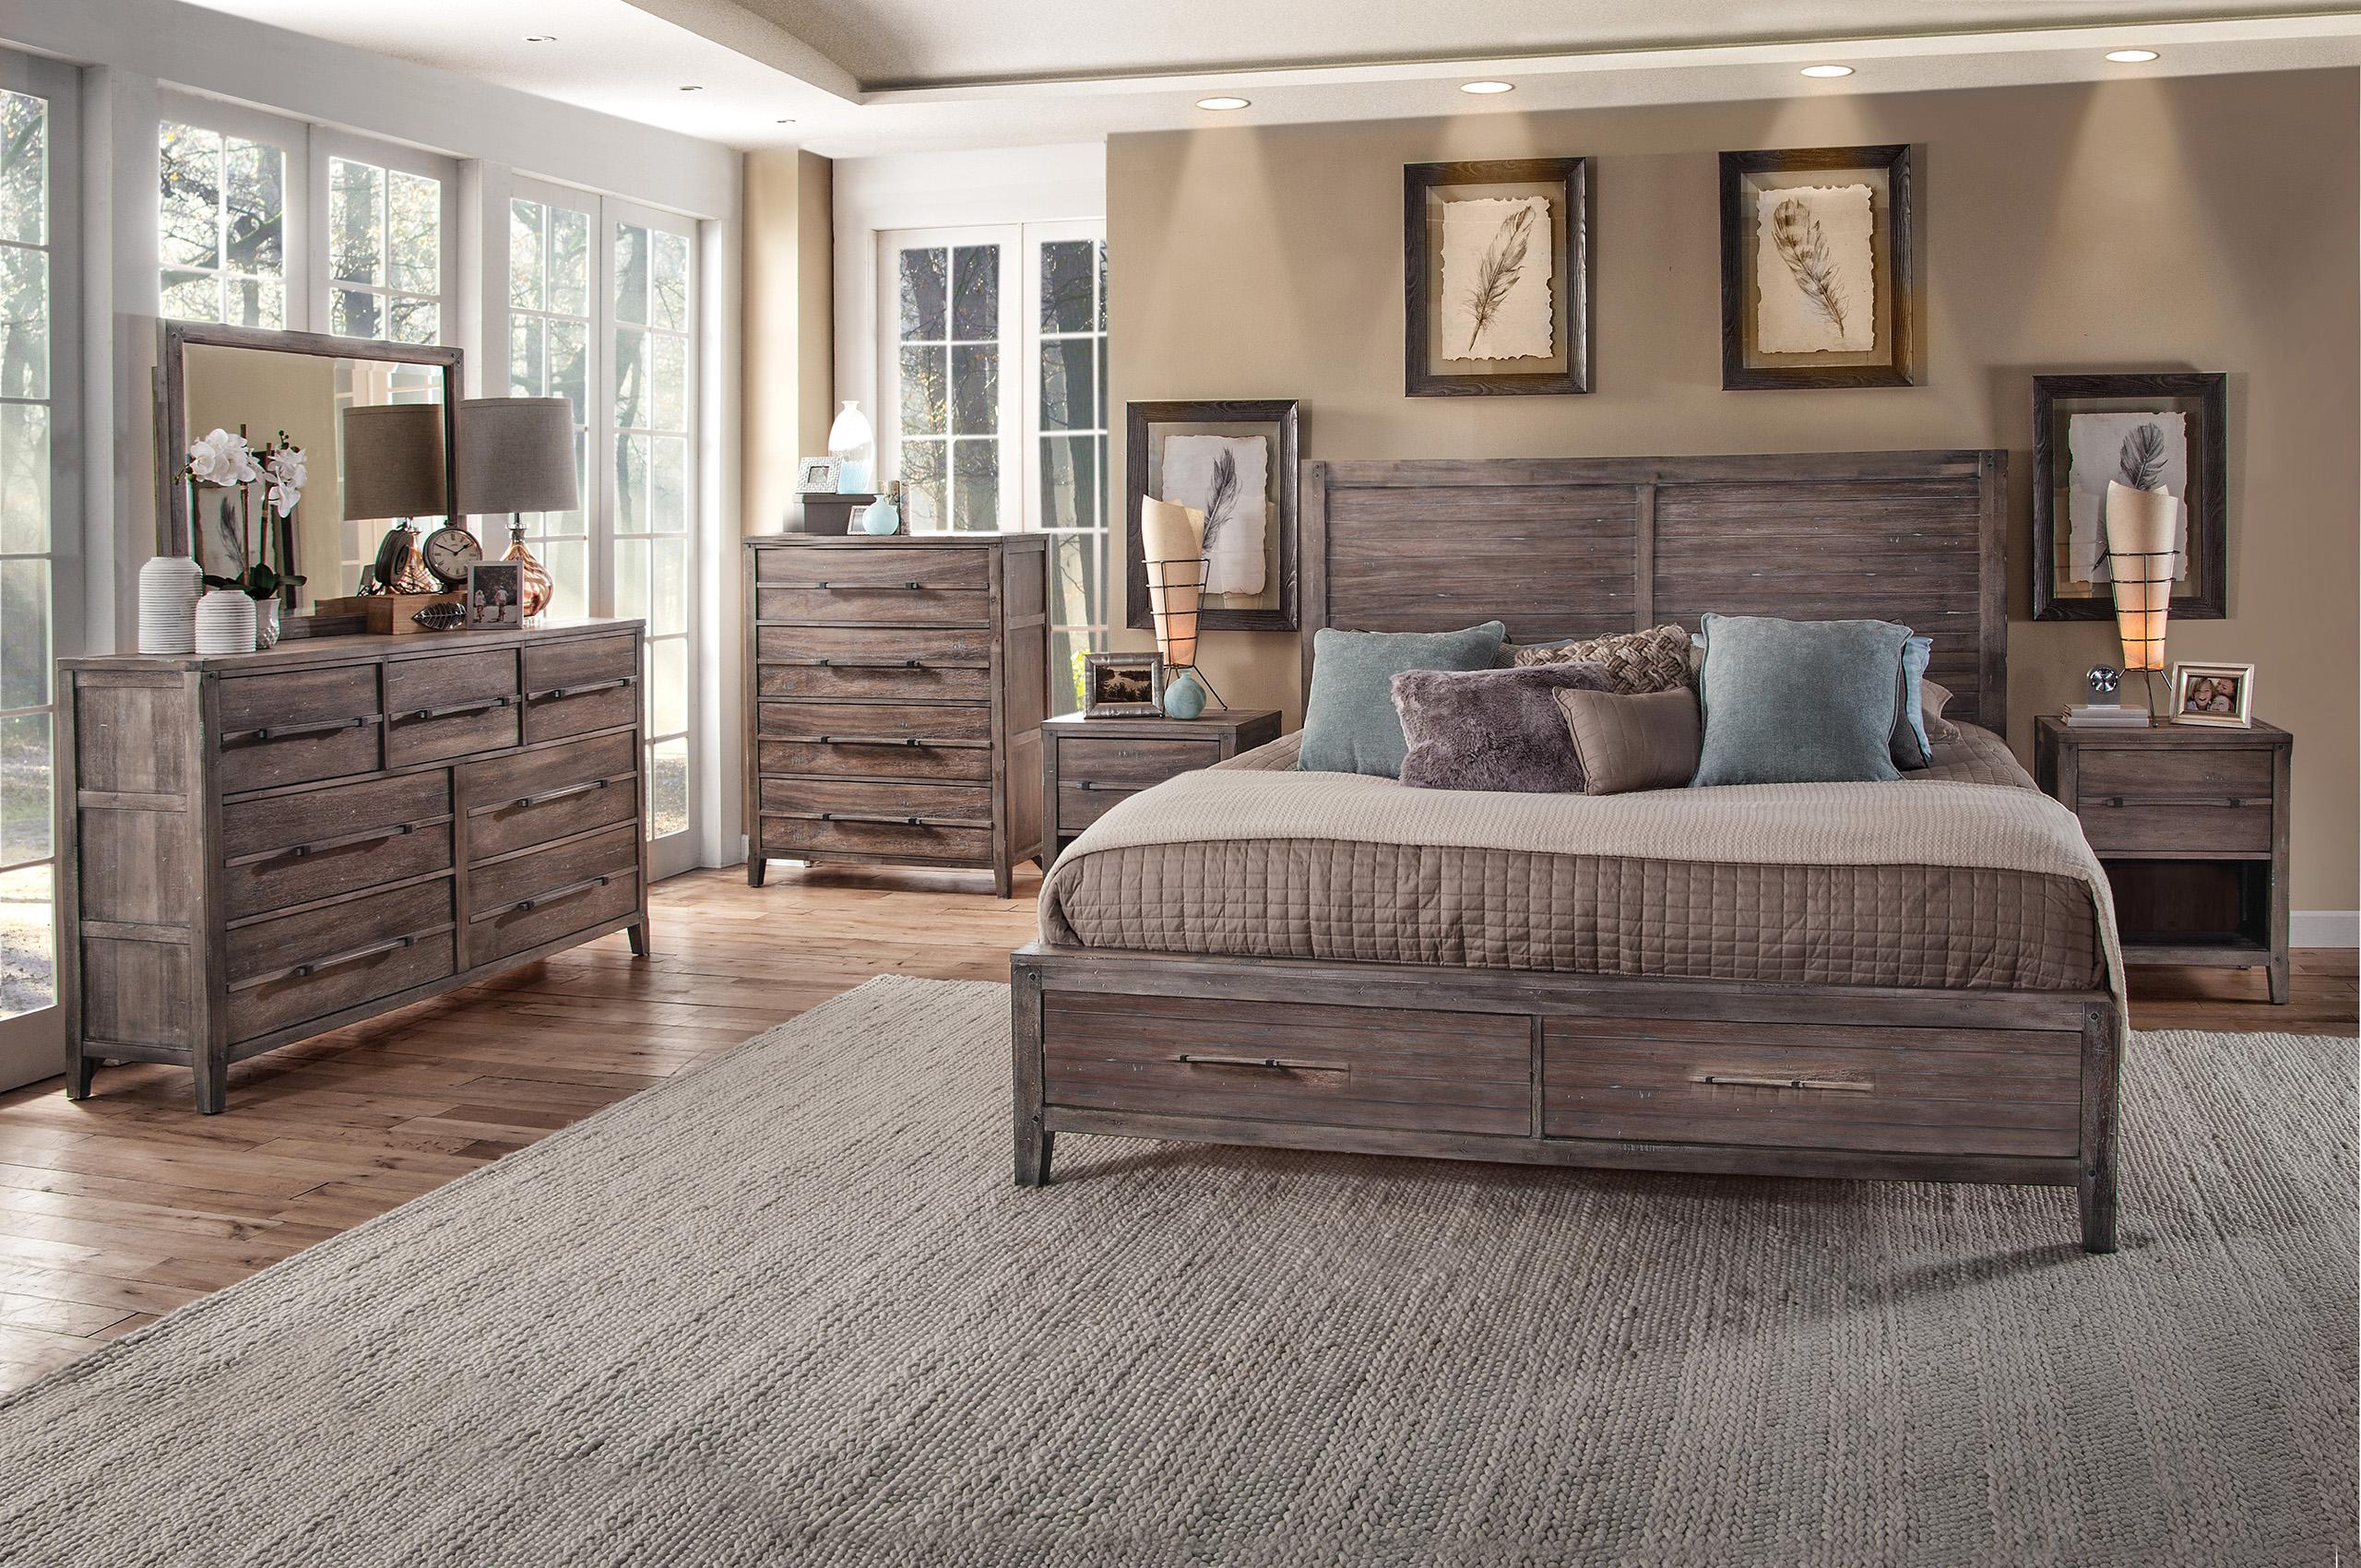 Classic, Traditional Panel Bedroom Set AURORA 2800-50PNST 2800-QPNST-4PC in Driftwood, Gray 